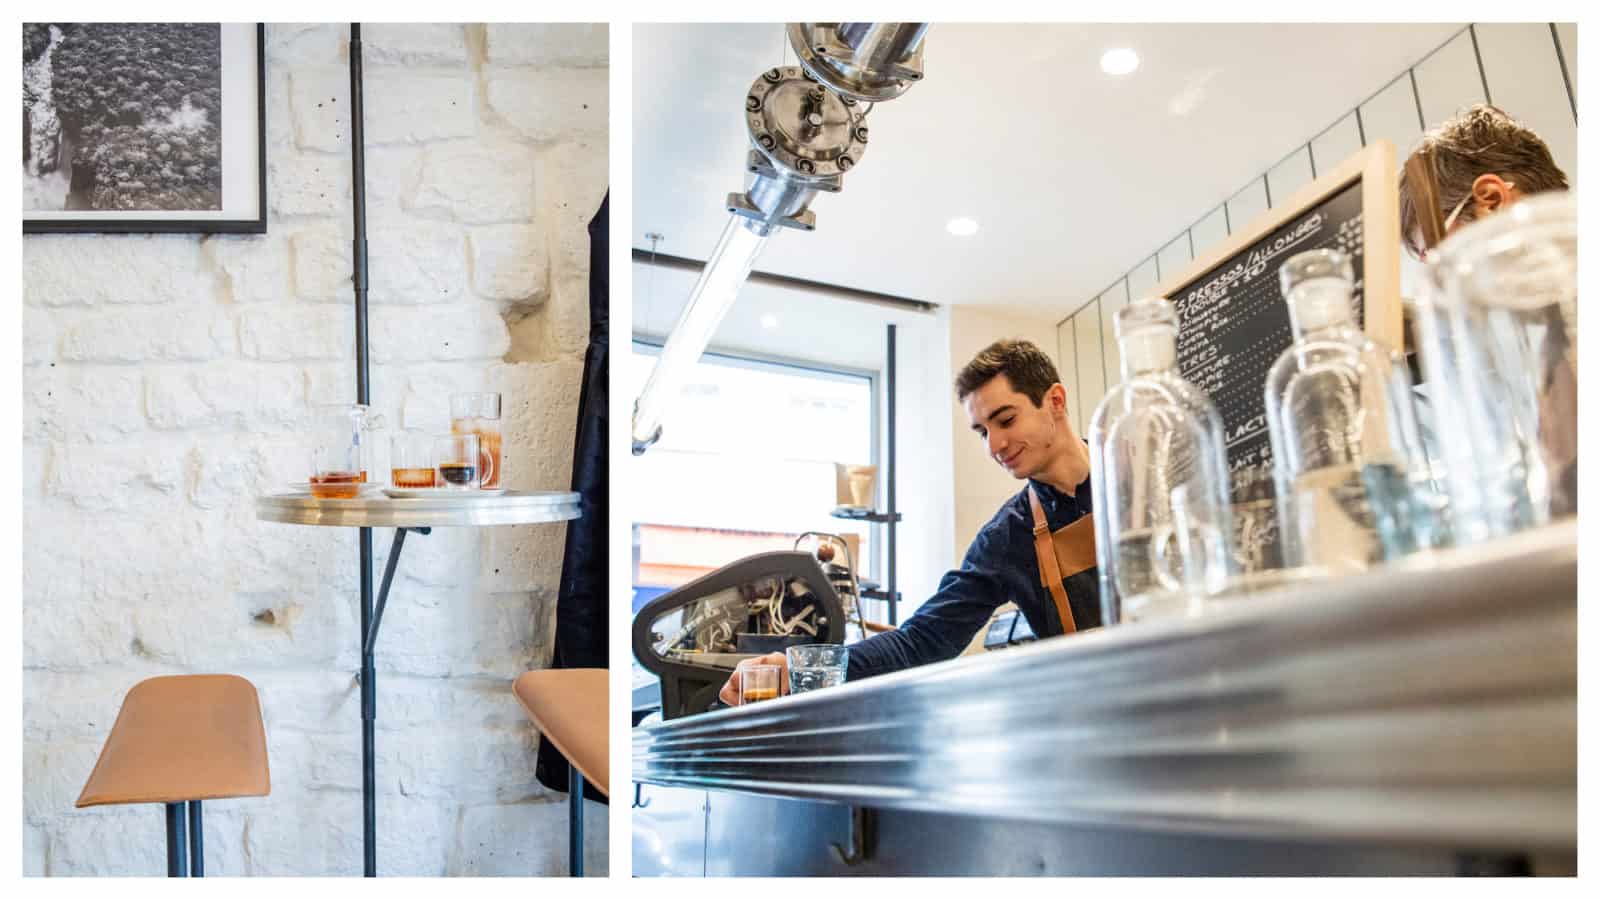 Alain Ducasse's Le Café is our go-to coffee shop on rue du Cherche-Midi with stylish interiors (left) and craft coffee you can enjoy at the counter (right).